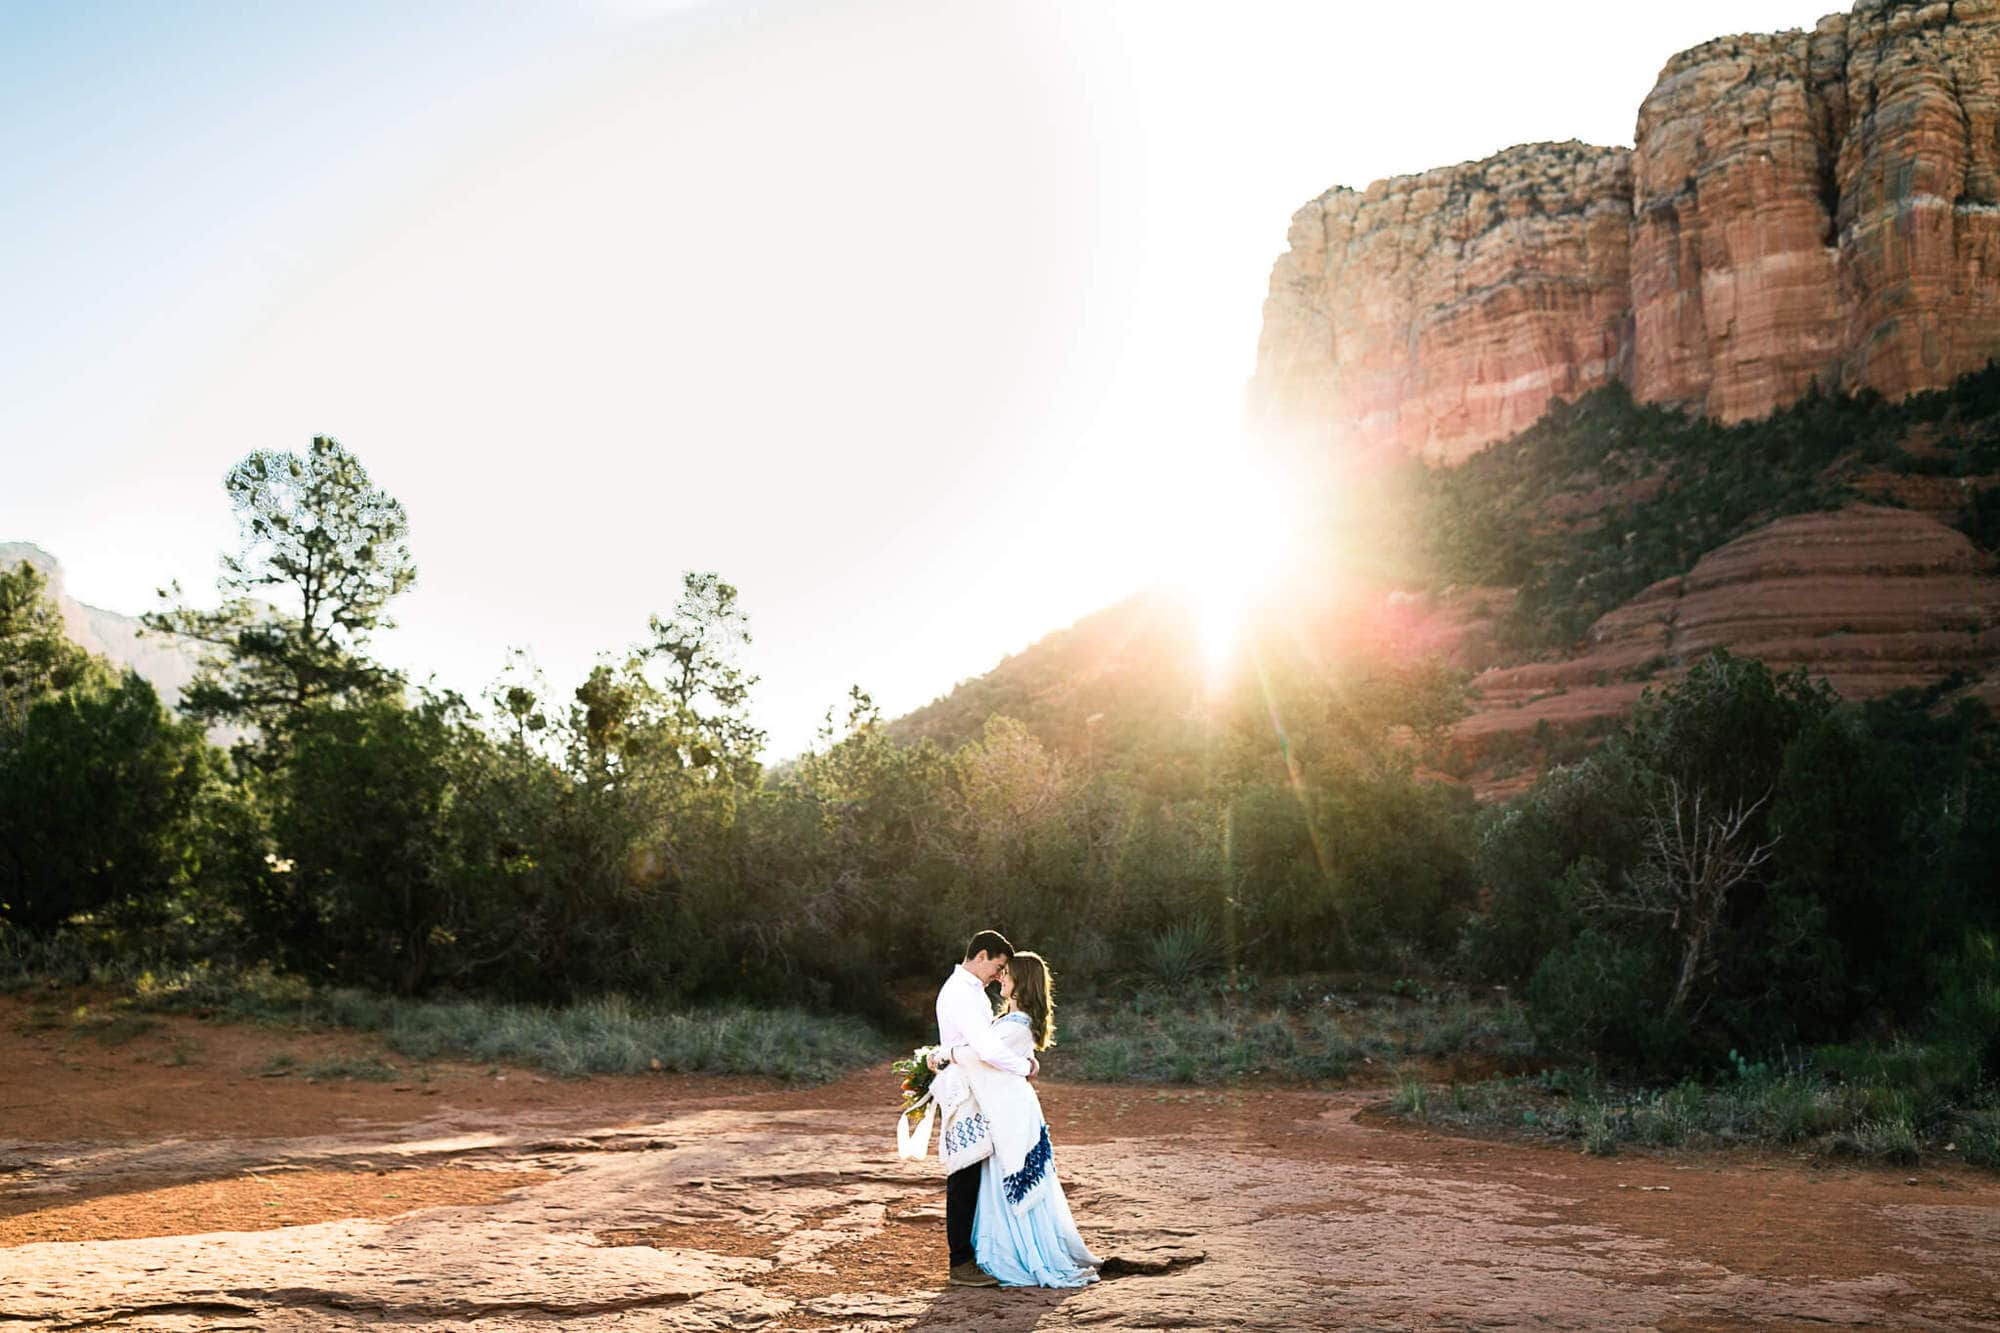 If you're planning a Sedona Elopement, then this is the guide for you. Everything you need to know about planning a small Sedona Wedding can be found here.